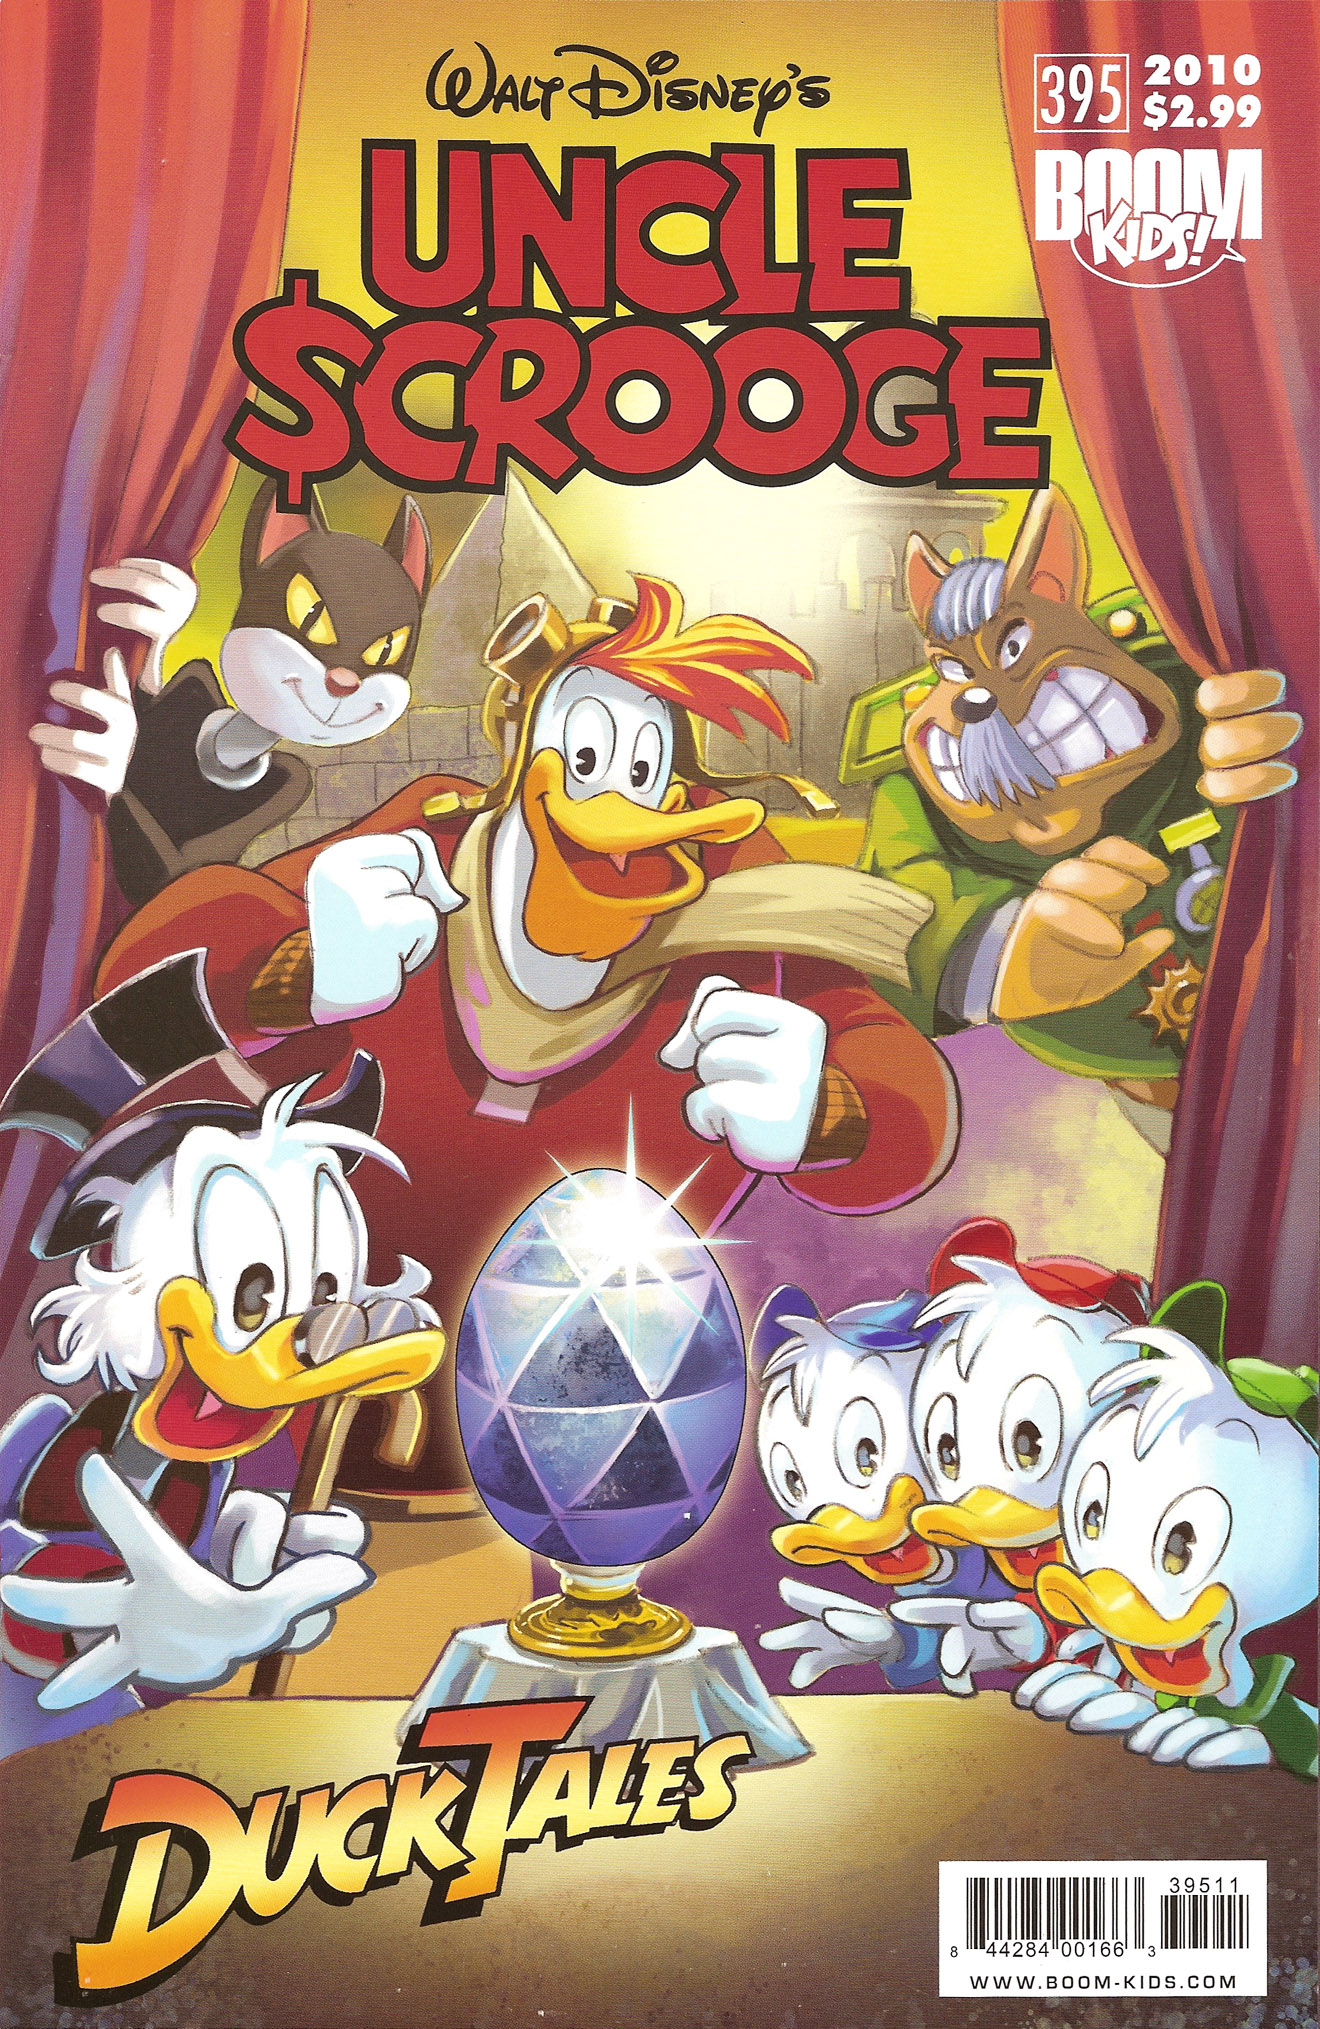 Read online Uncle Scrooge (2009) comic -  Issue #395 - 2